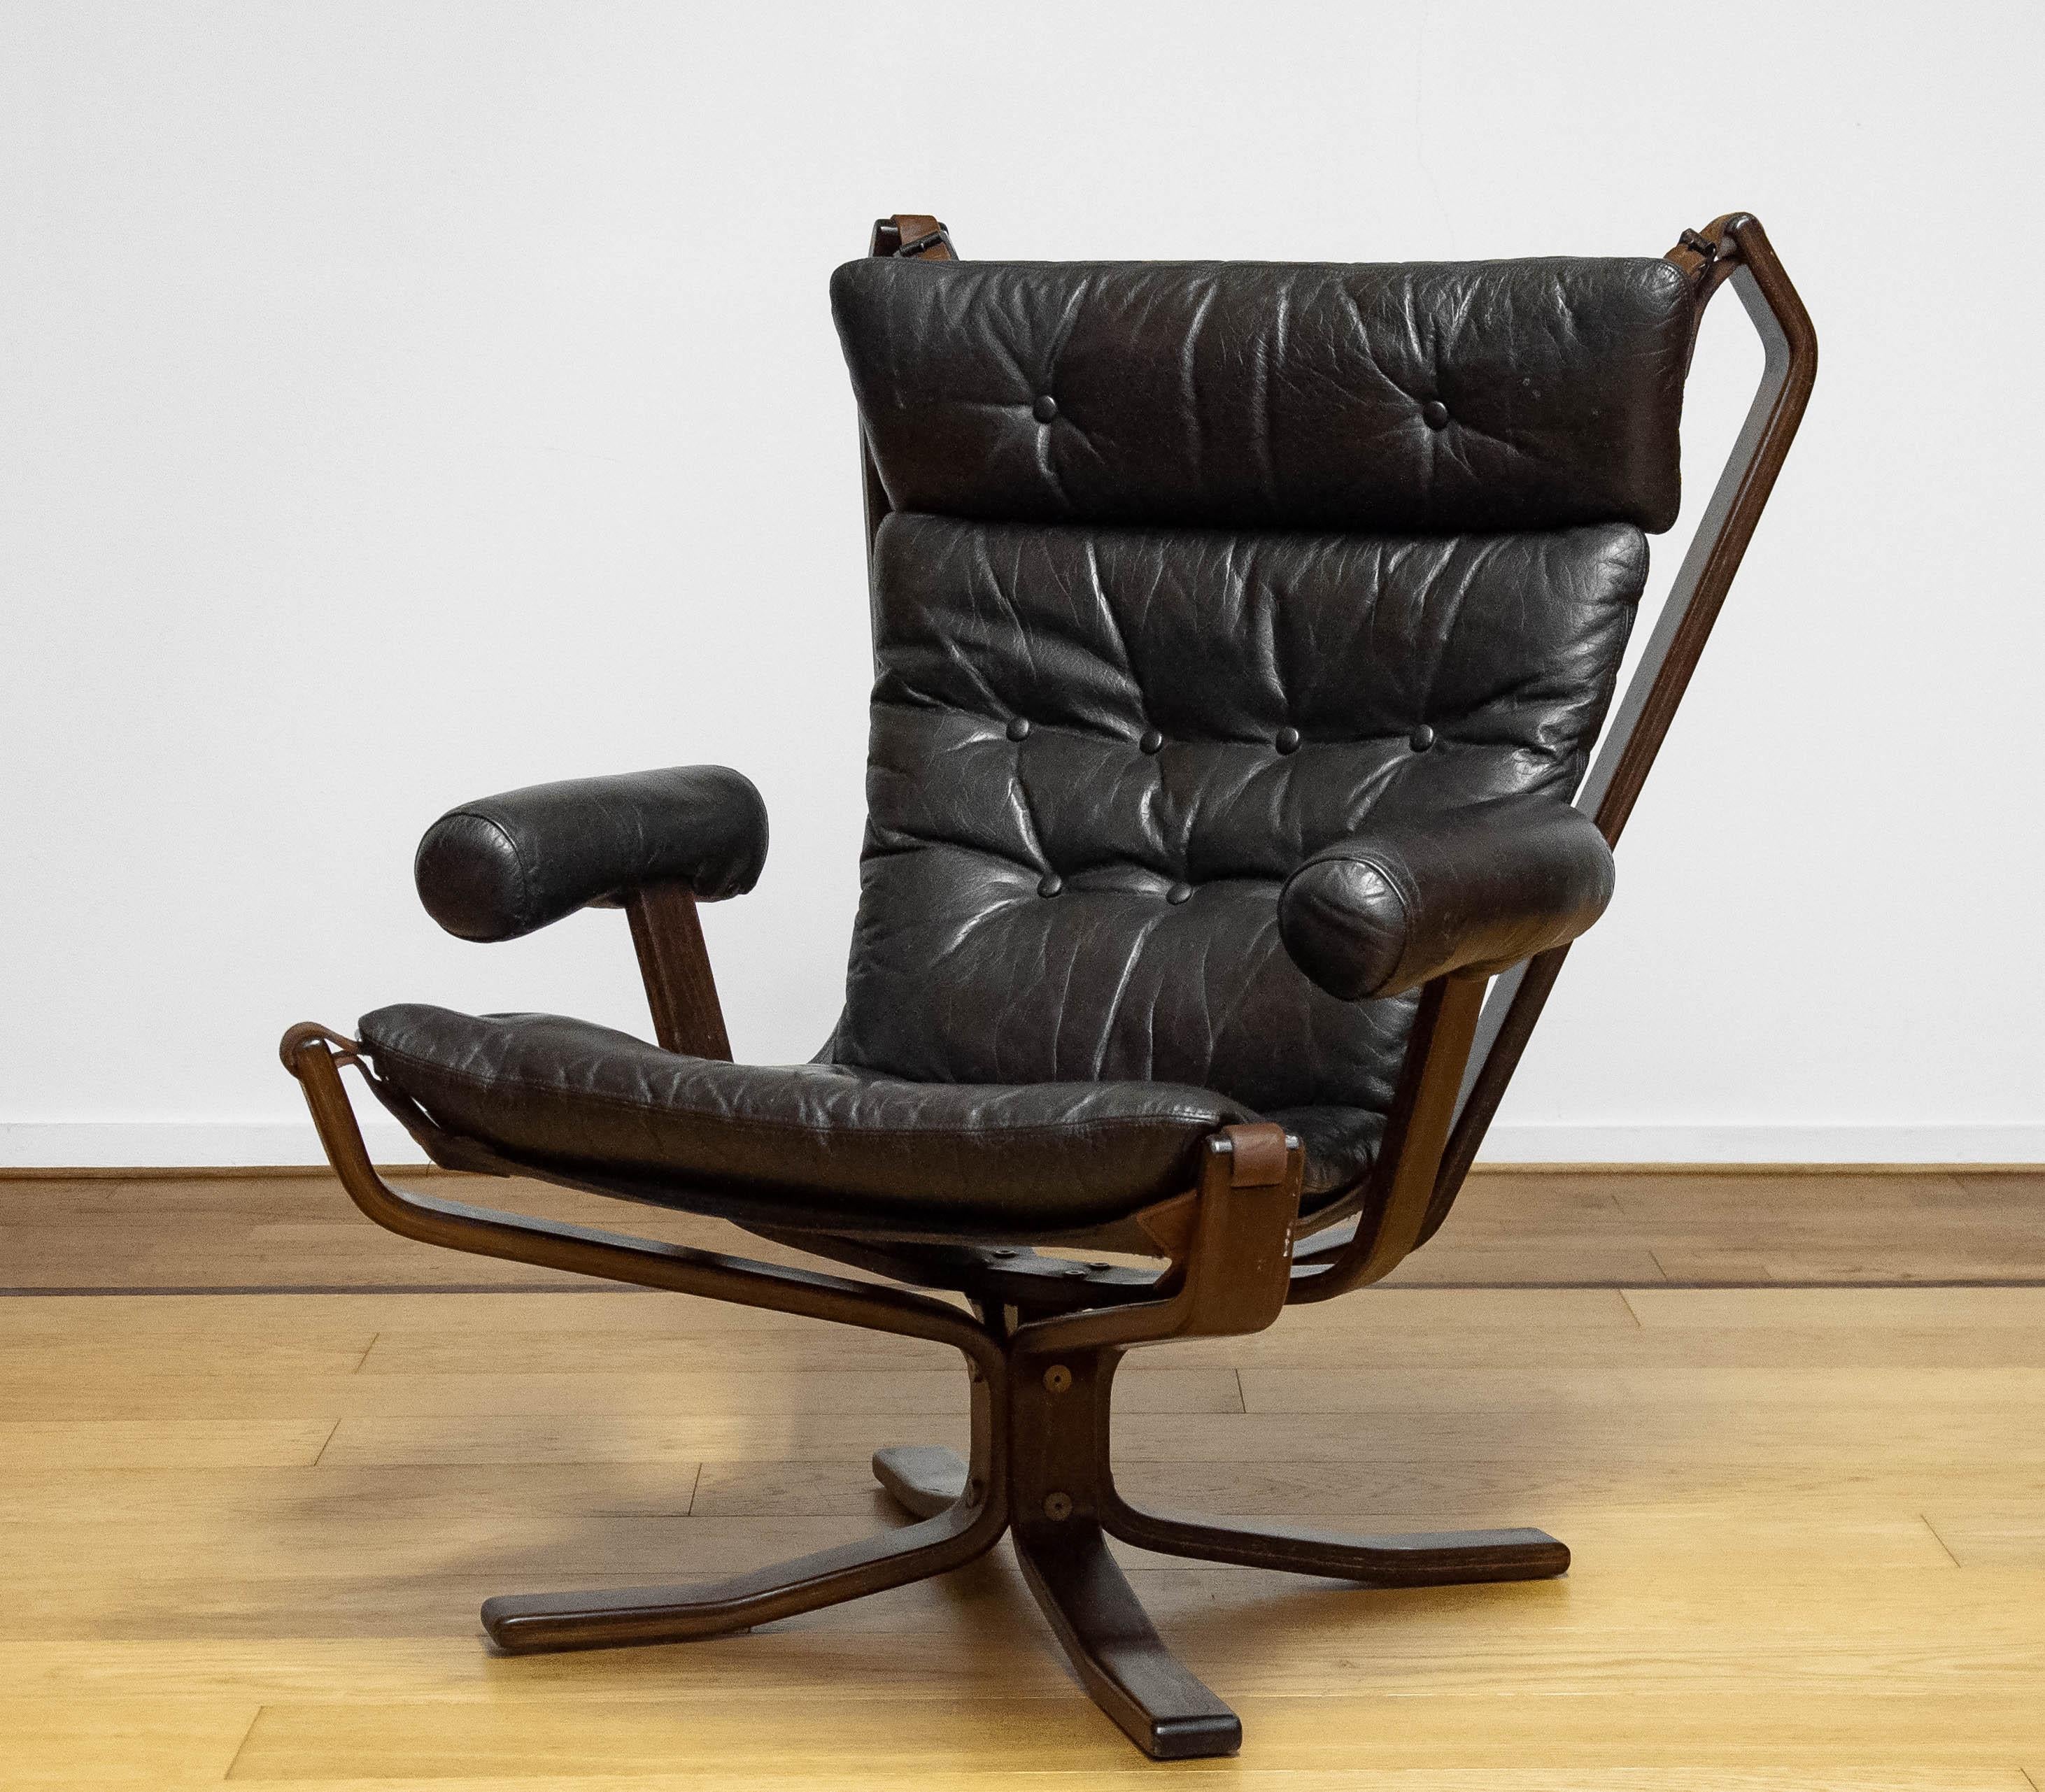 Beautiful rare lounge chair model 'Superstar' designed by Sigurd Ressel and made by Trygg Mobler in Denmark.
These models were made in a limited edition.
Also famous under the name 